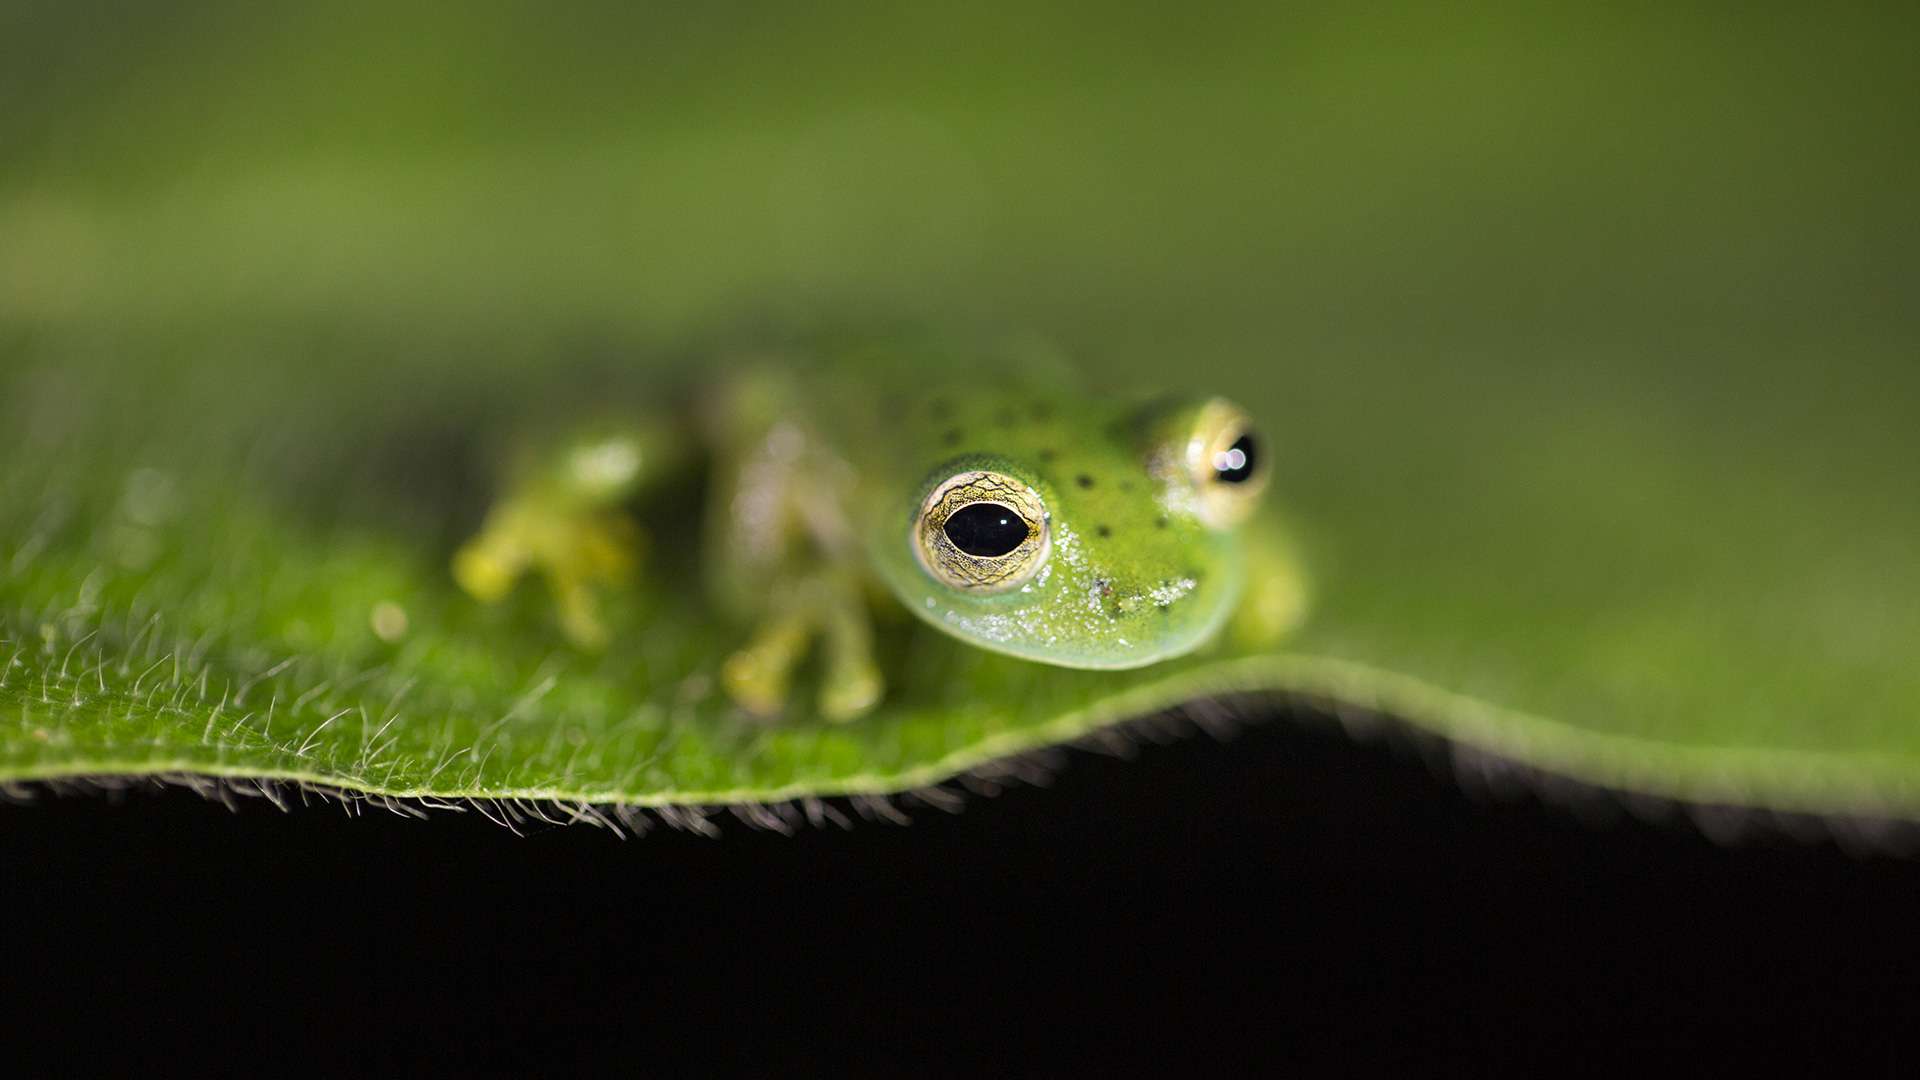 Gilles Martin's photograph of a frog from Costa Rica